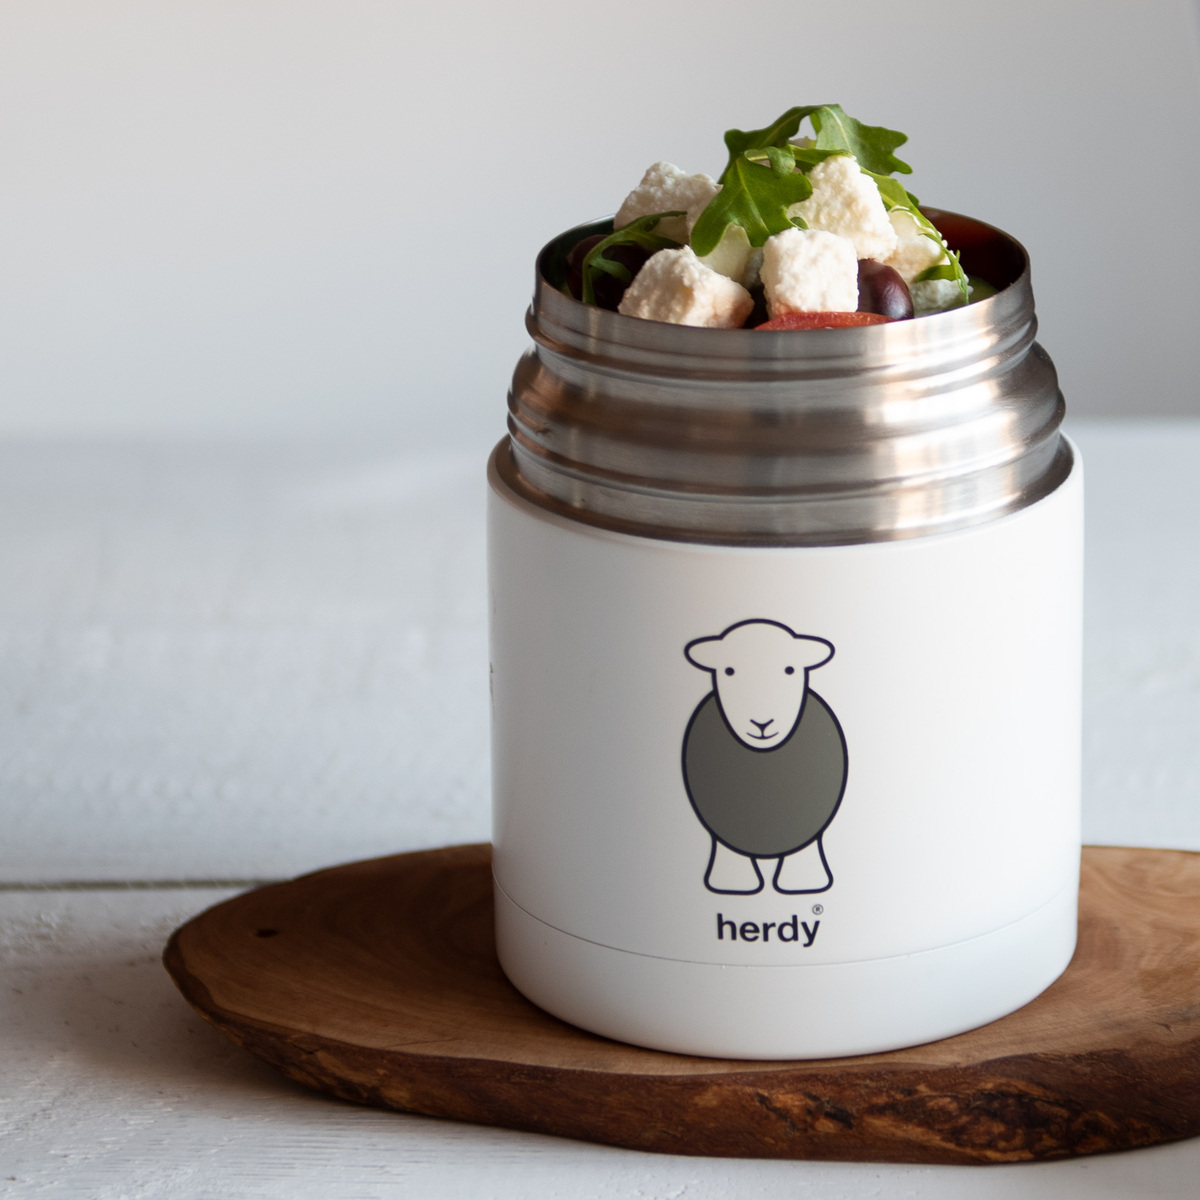 Herdy Food Flask filled with feta salad